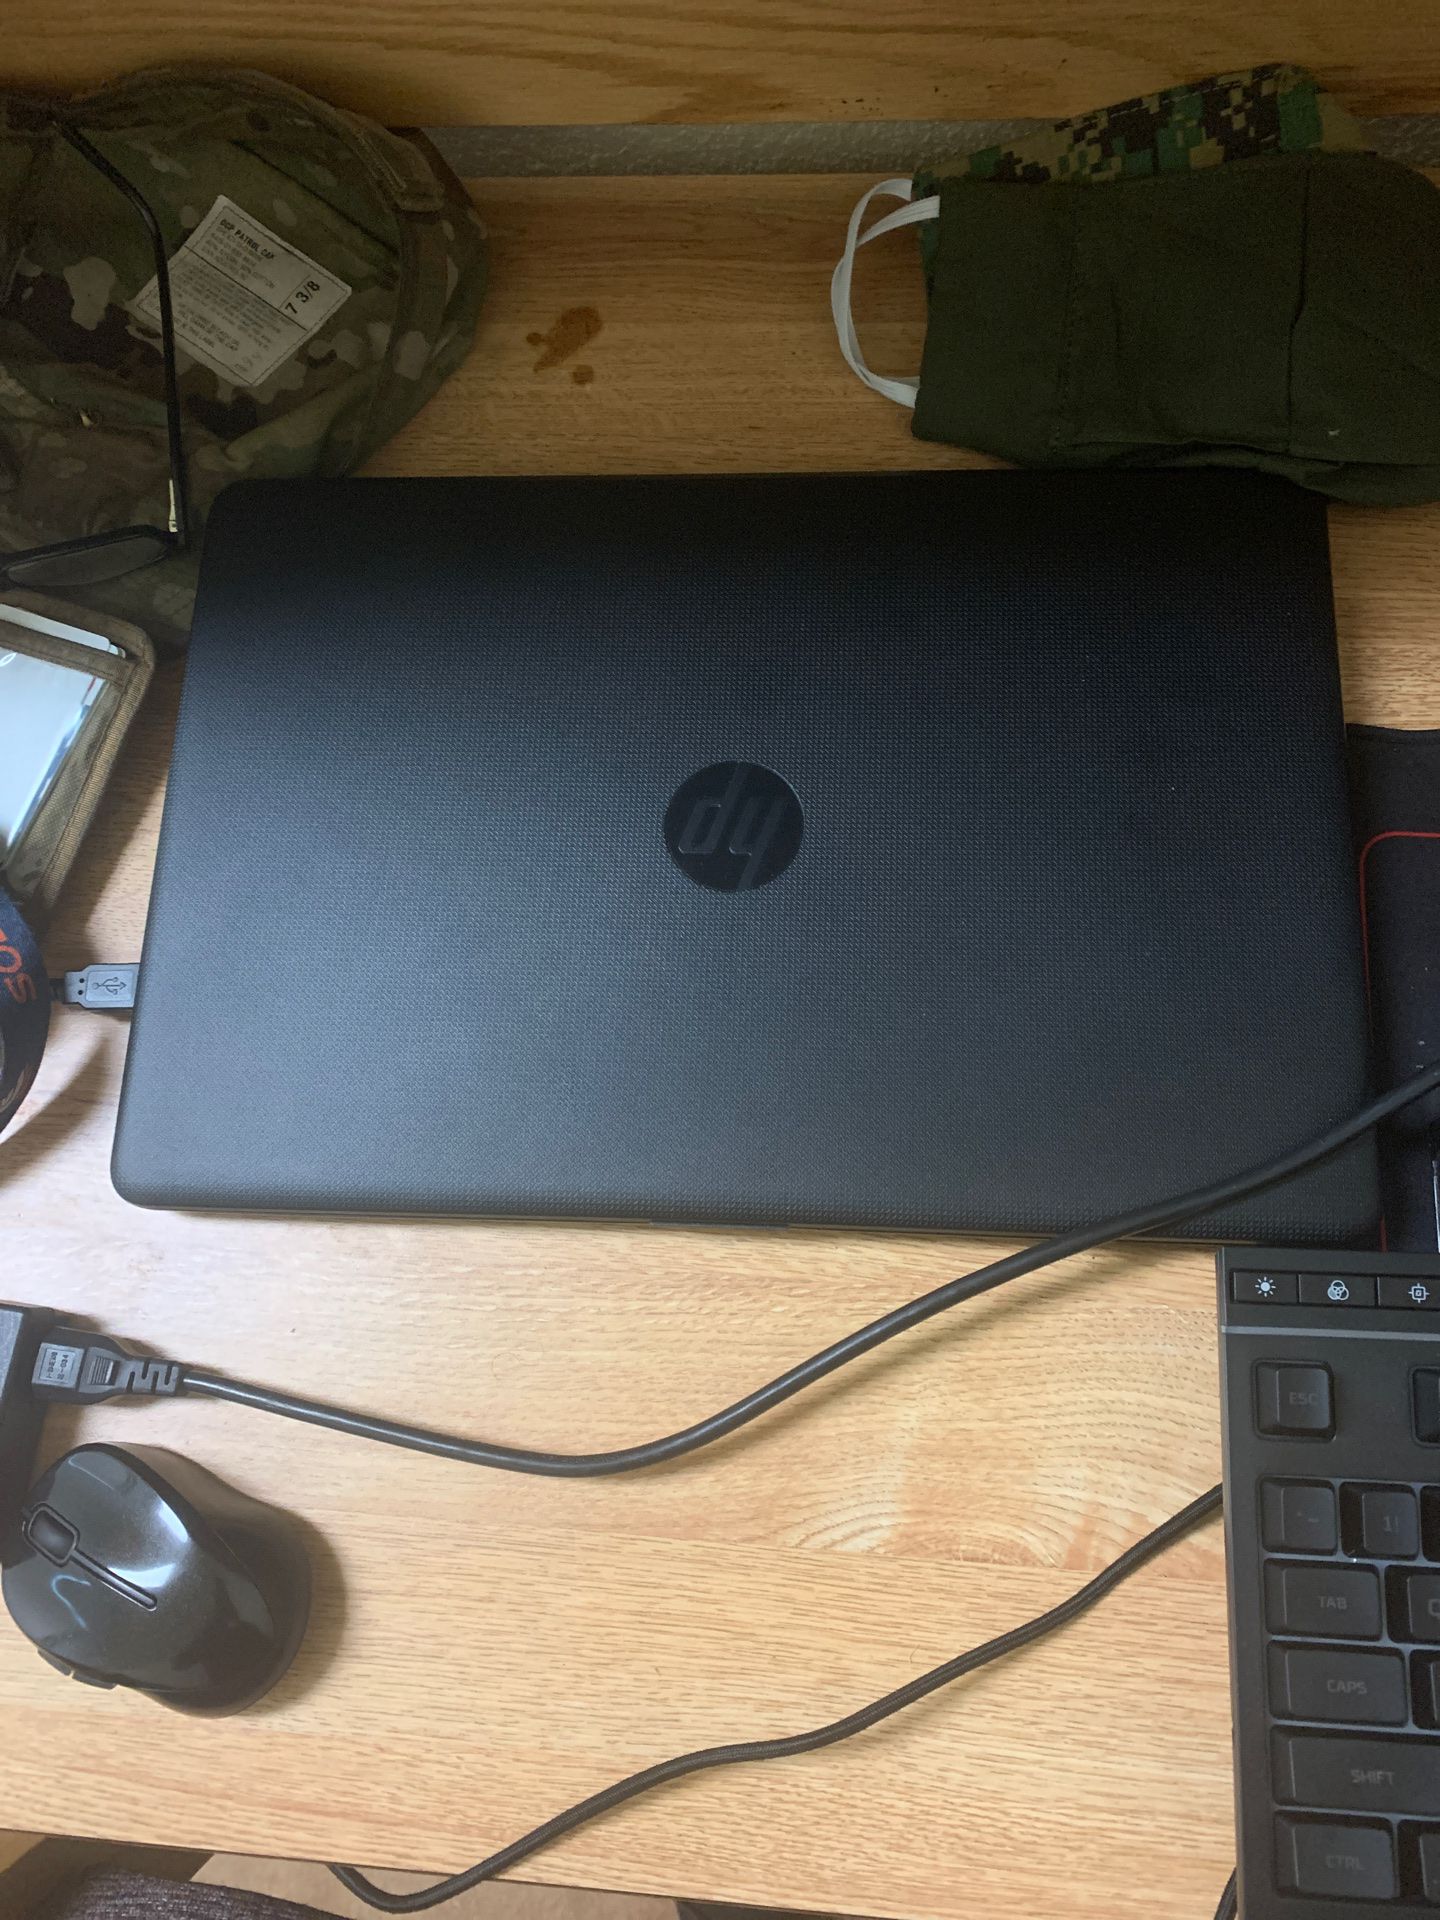 Hp laptop for Sale in Cypress, CA - OfferUp